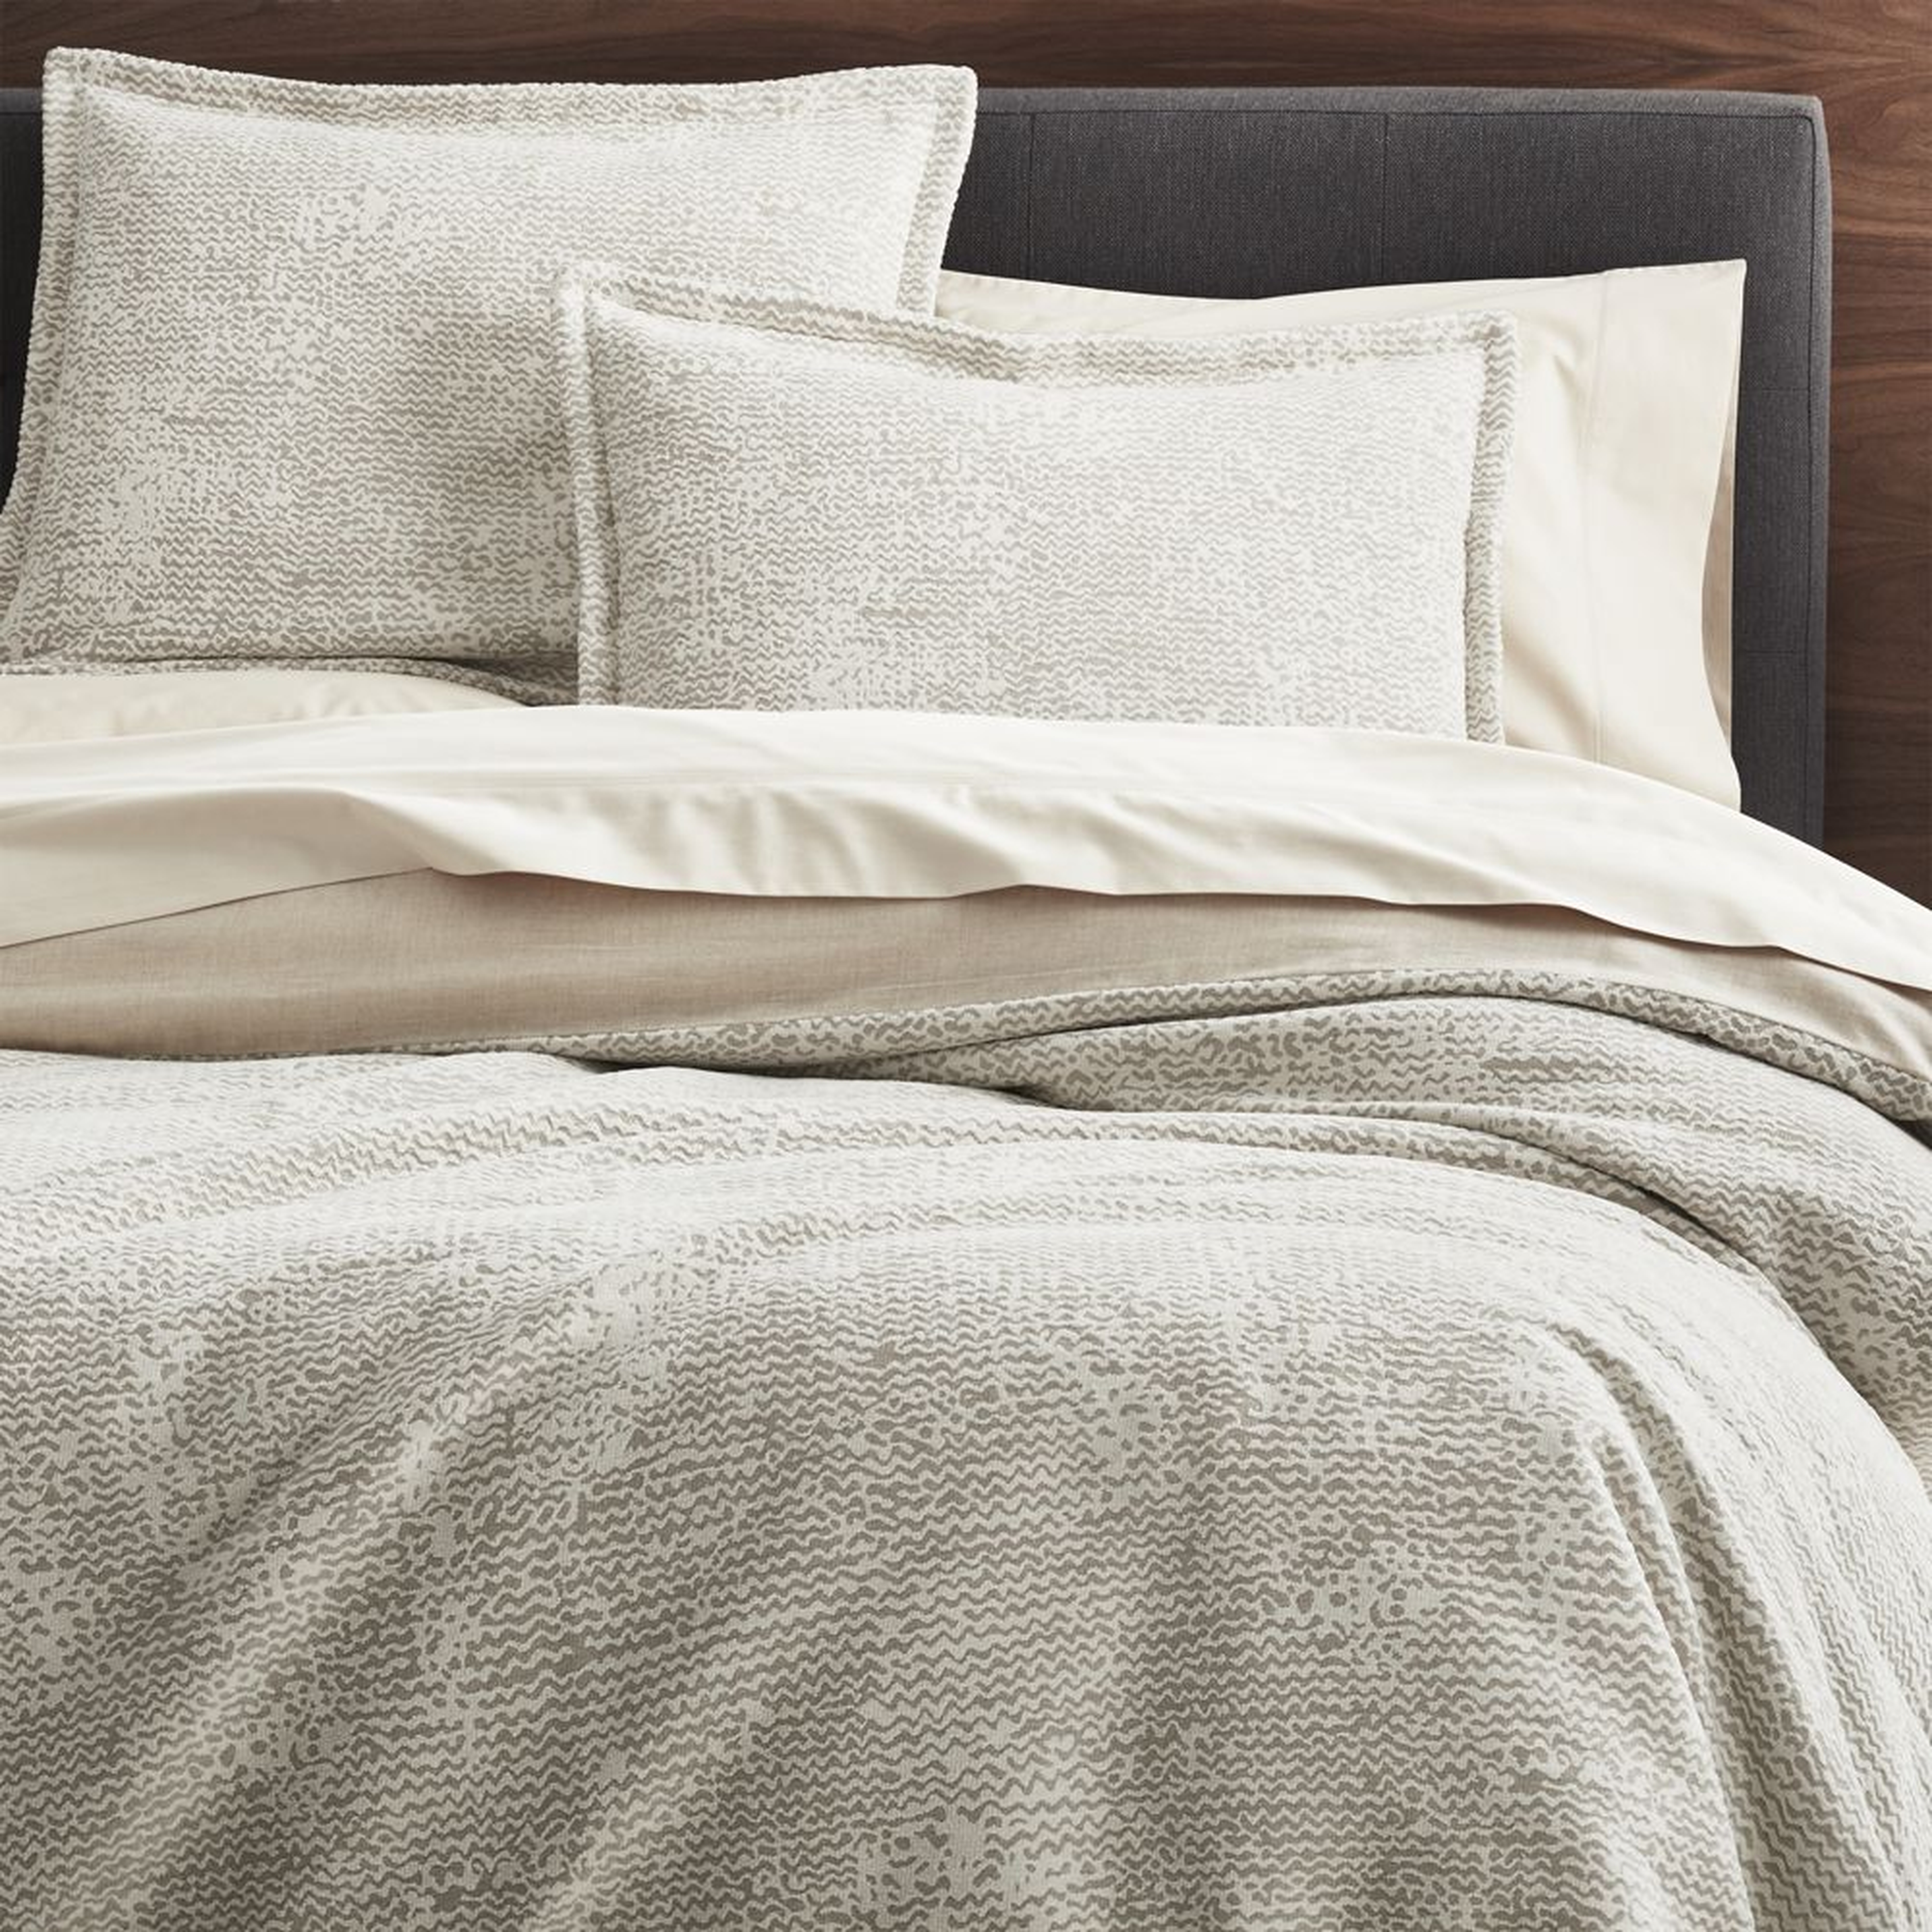 Brice Natural Patterned King Duvet Cover - Crate and Barrel